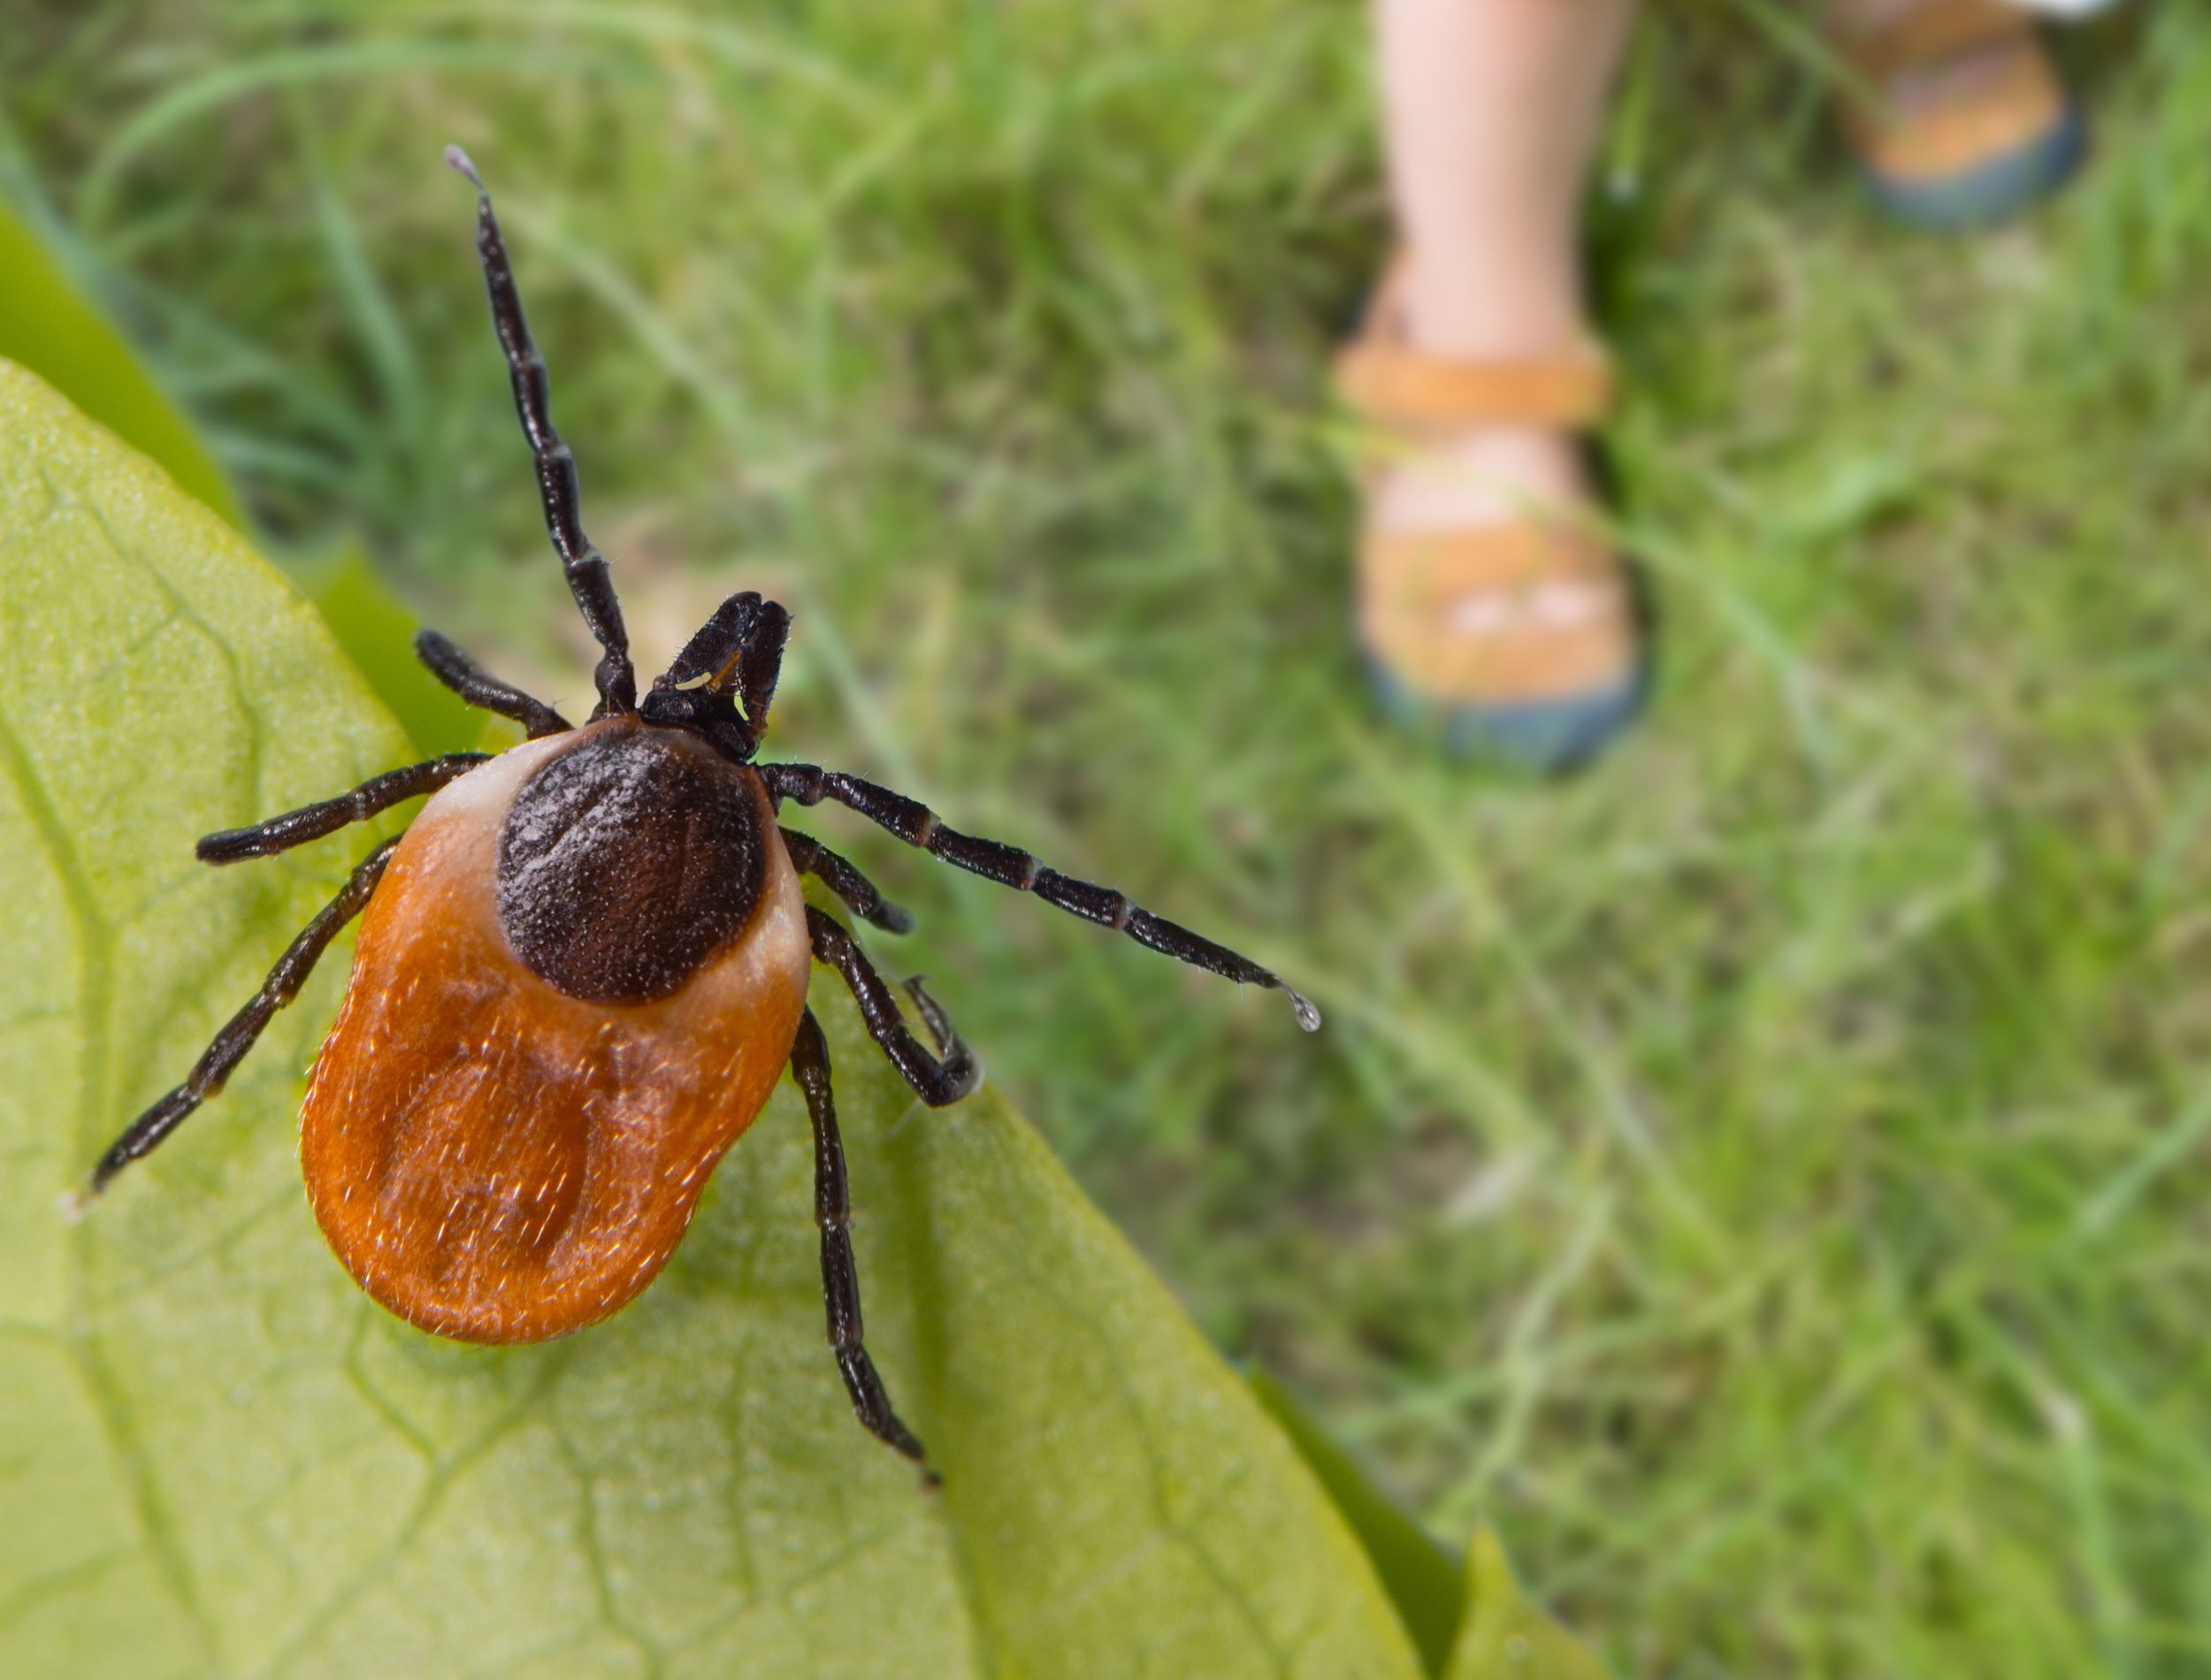 Lawn Care Mistake That Attracts Ticks and Other Pests to Your Yard